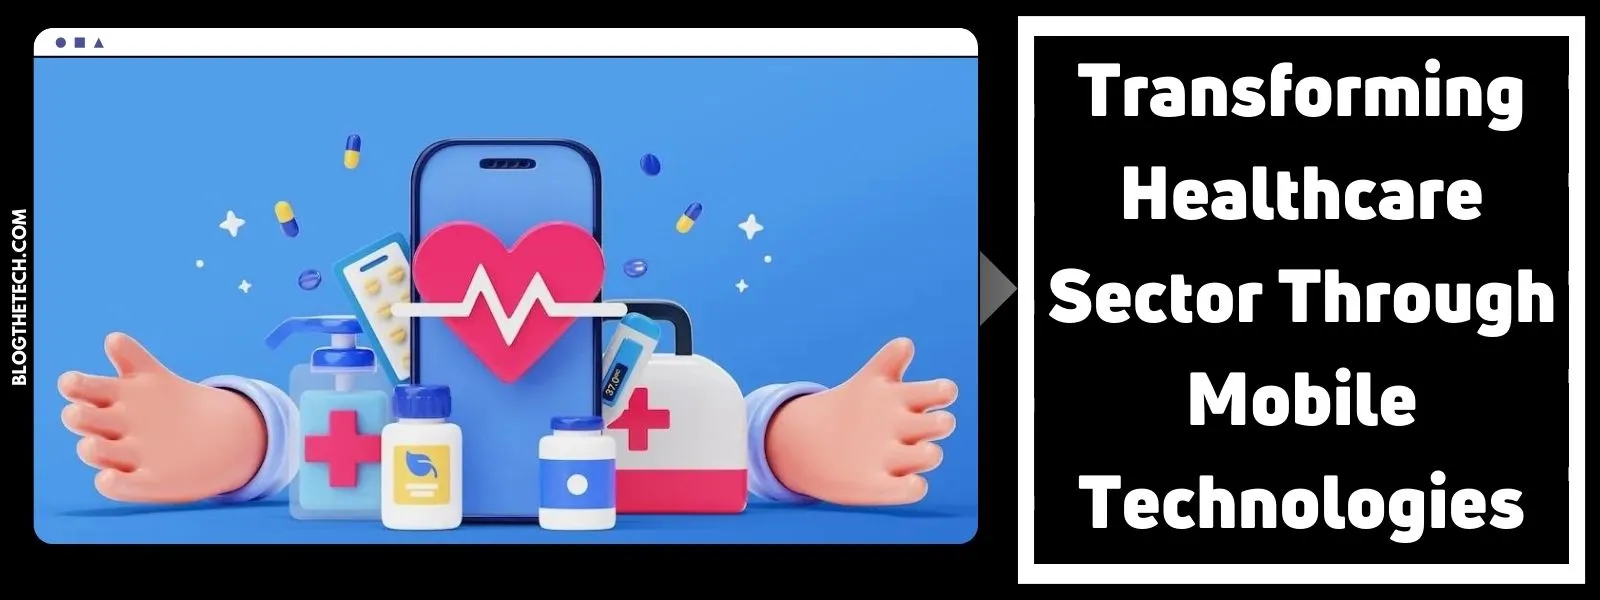 Banner illustrating the integration of mobile technology in healthcare, featuring a stylized smartphone with health-related graphics, playful hands, and an informative slogan on the right.